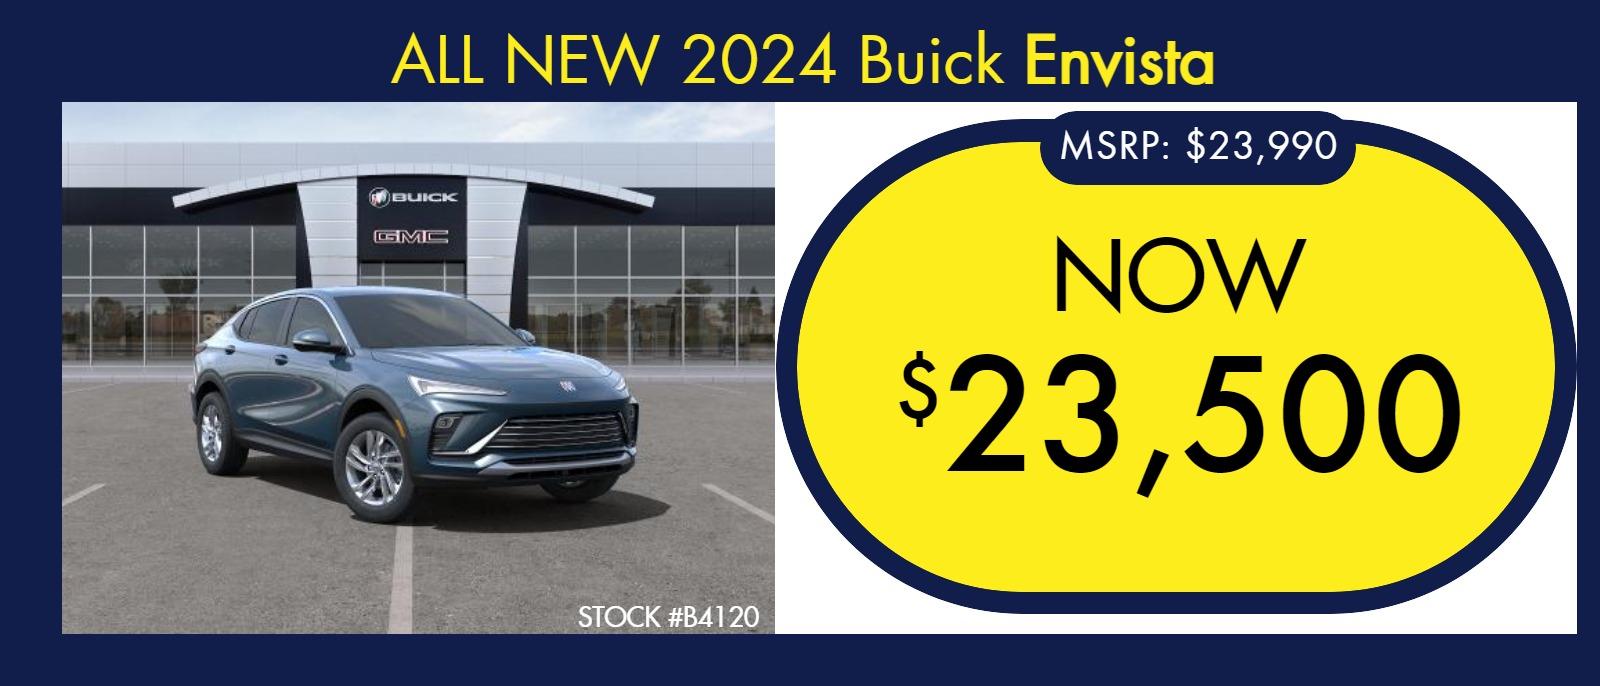 2024 Buick Envista
Stock #B4120
MSRP $23,990
NOW $23,500